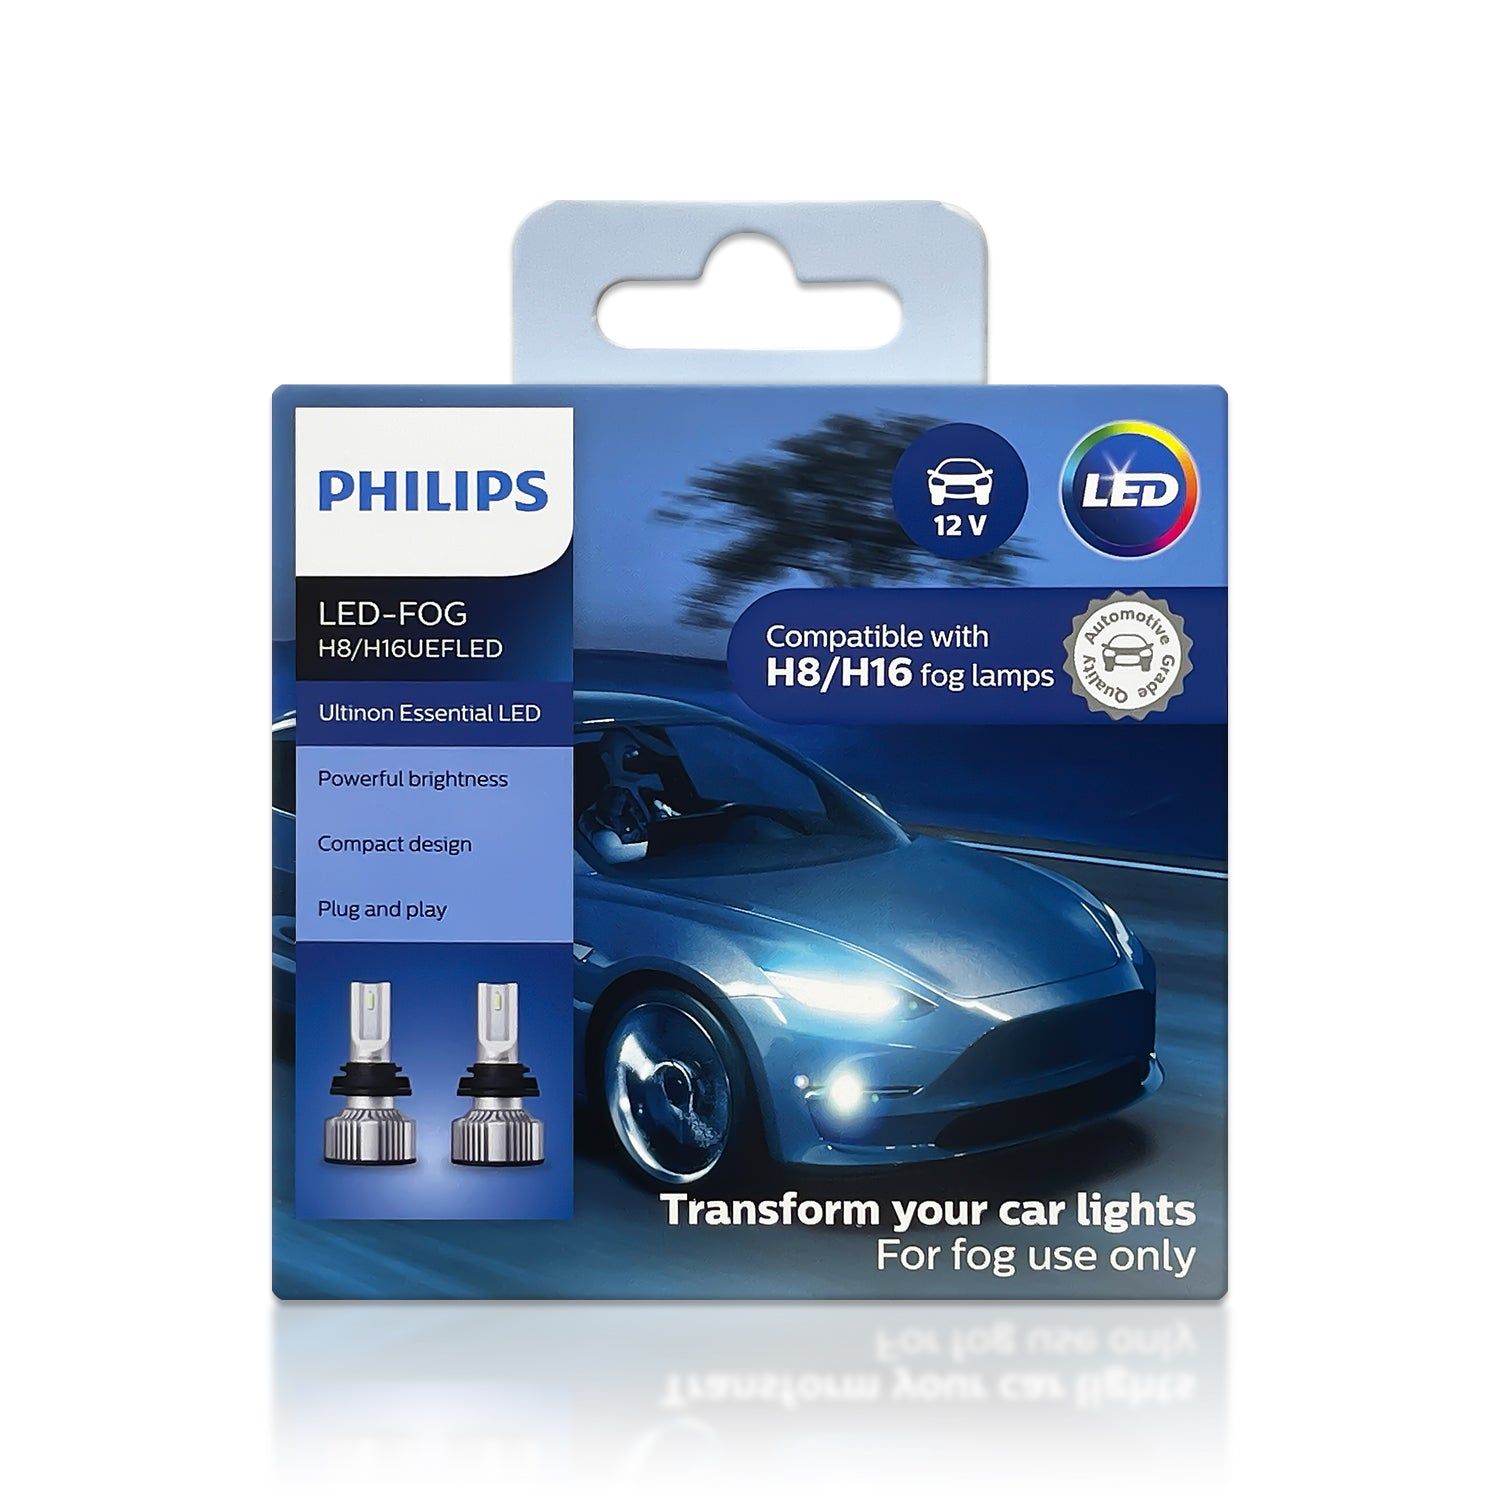 Philips X-tremeUltinon LED FOG H8 H11 H16 Bulbs Set of Two + CANbus Adaptor